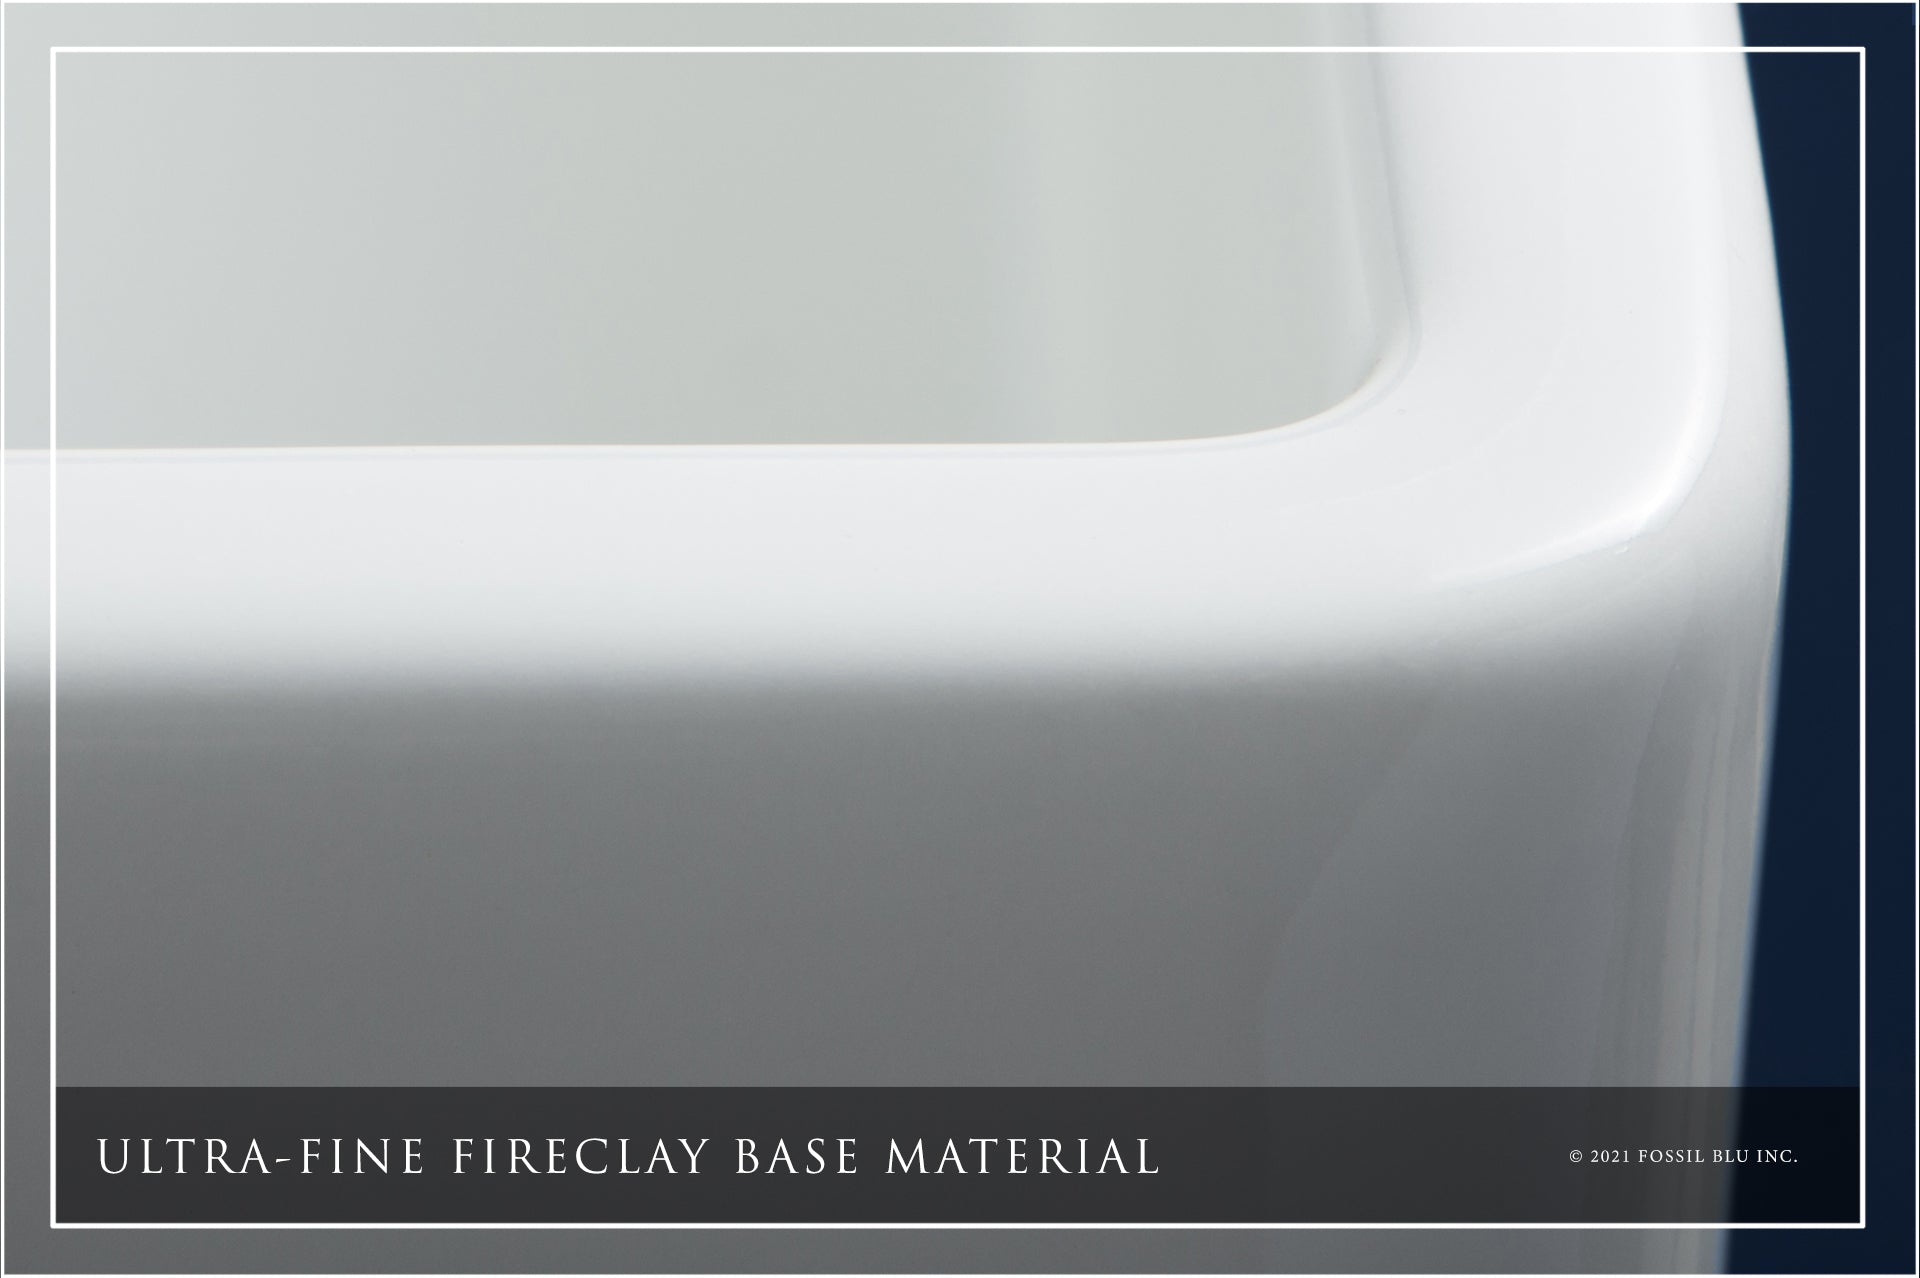 FSW1008MB LUXURY 36-INCH SOLID FIRECLAY FARMHOUSE SINK IN WHITE, MATTE BLACK ACCS, FLAT FRONT